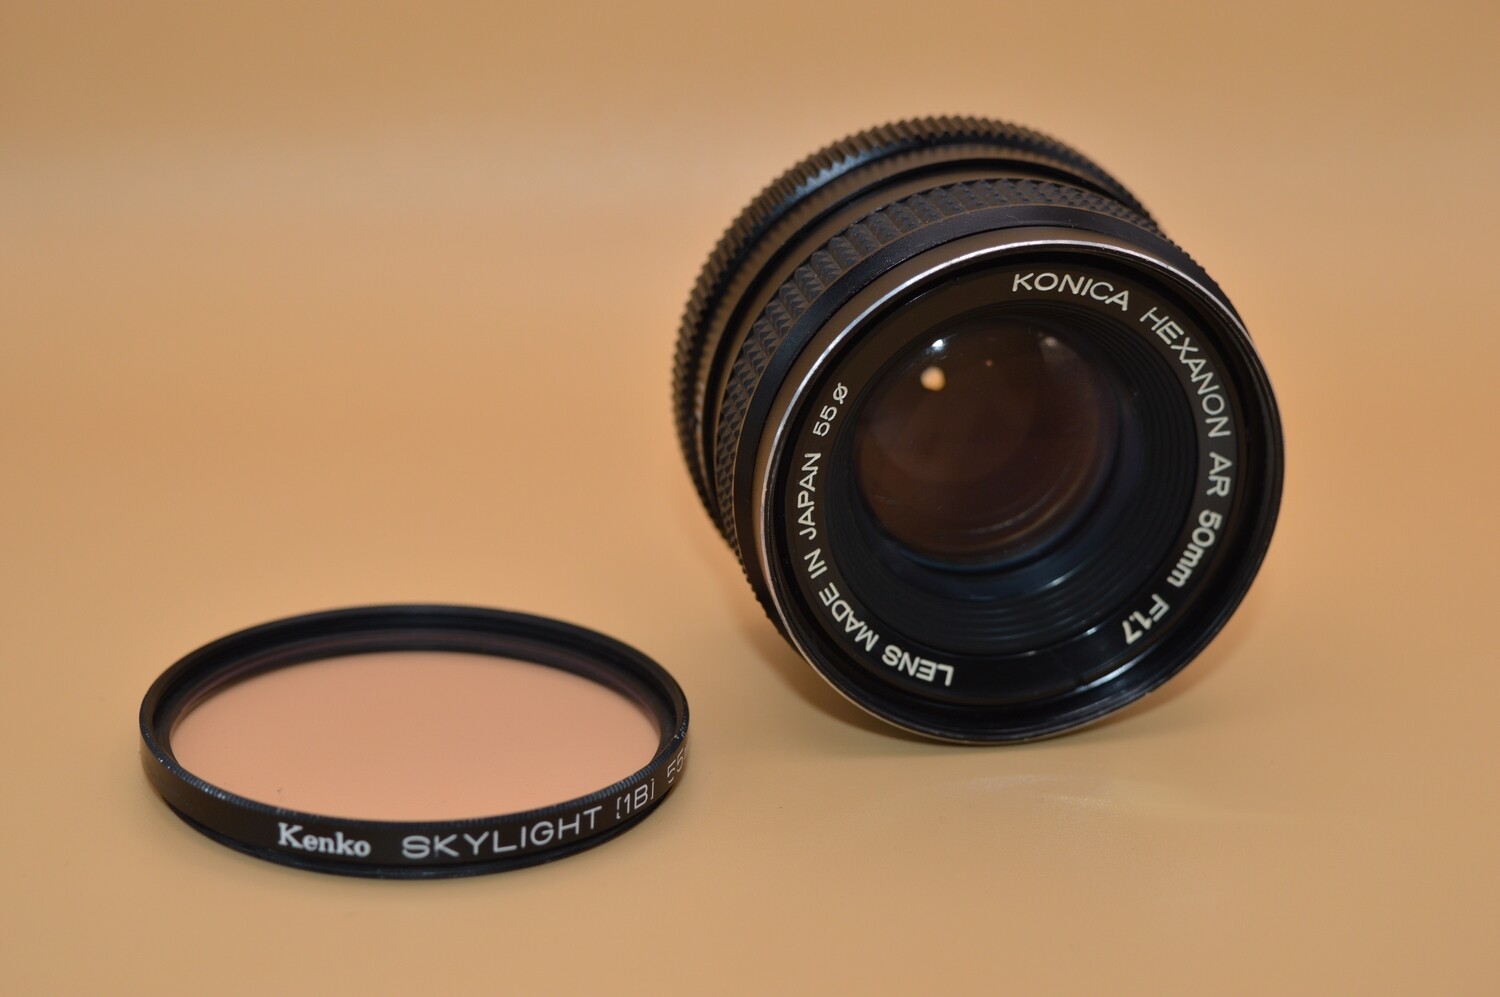 Konica Hexanon AR 50mm 1.7 Lens for parts/repairs as is